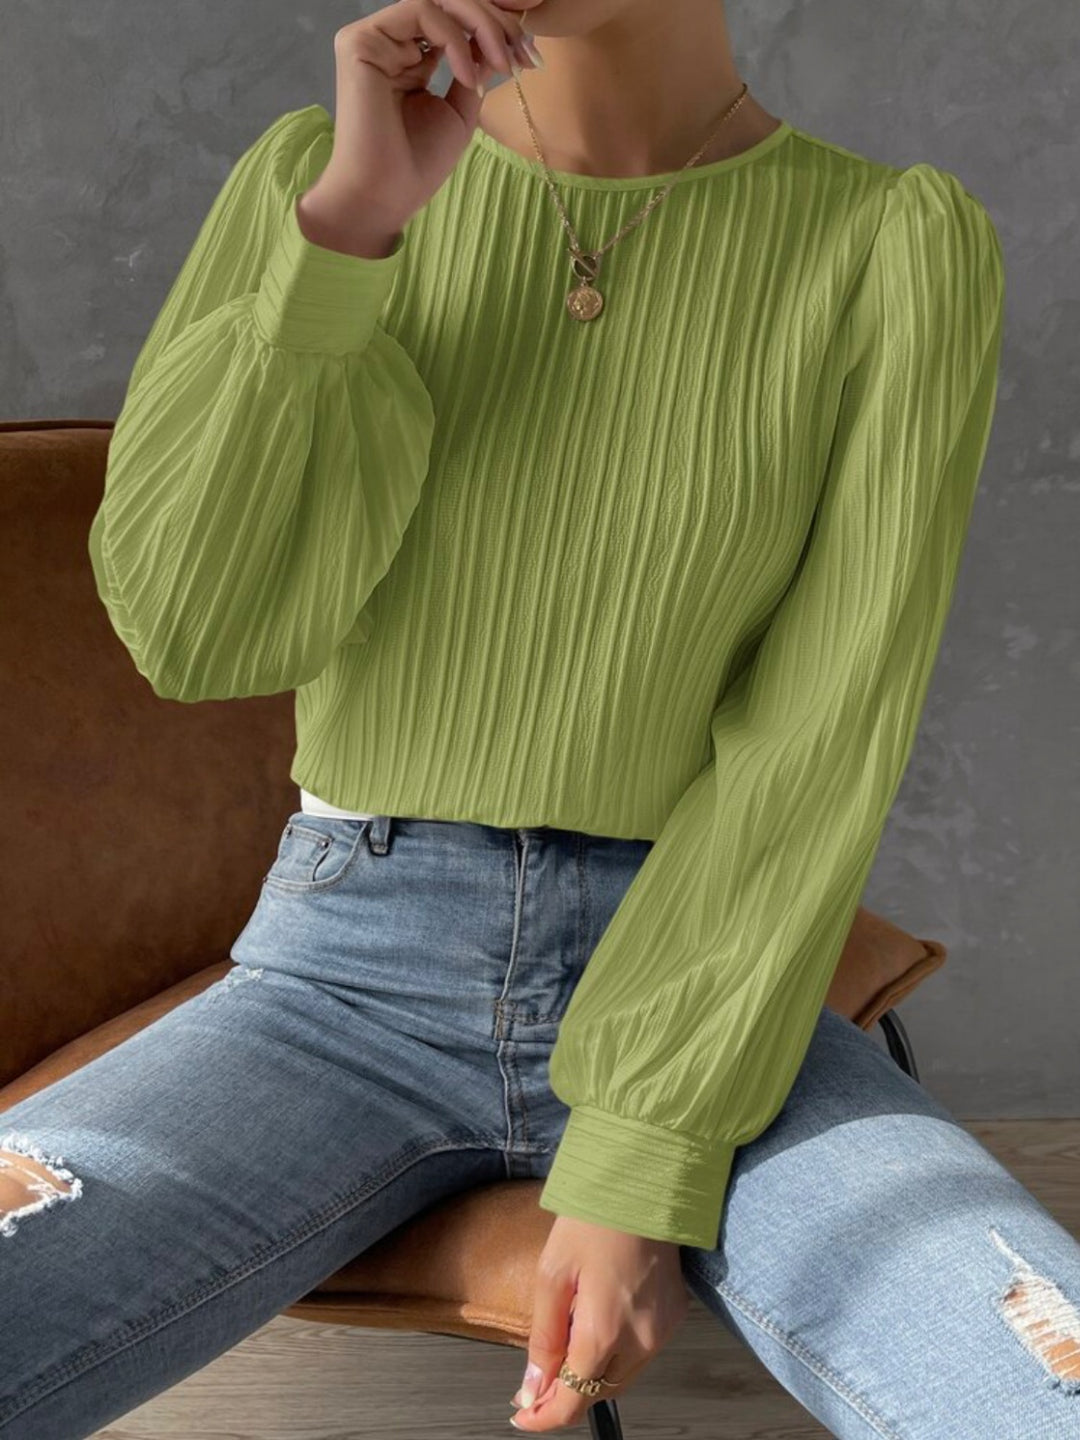 Textured Round Neck Long Sleeve Blouse